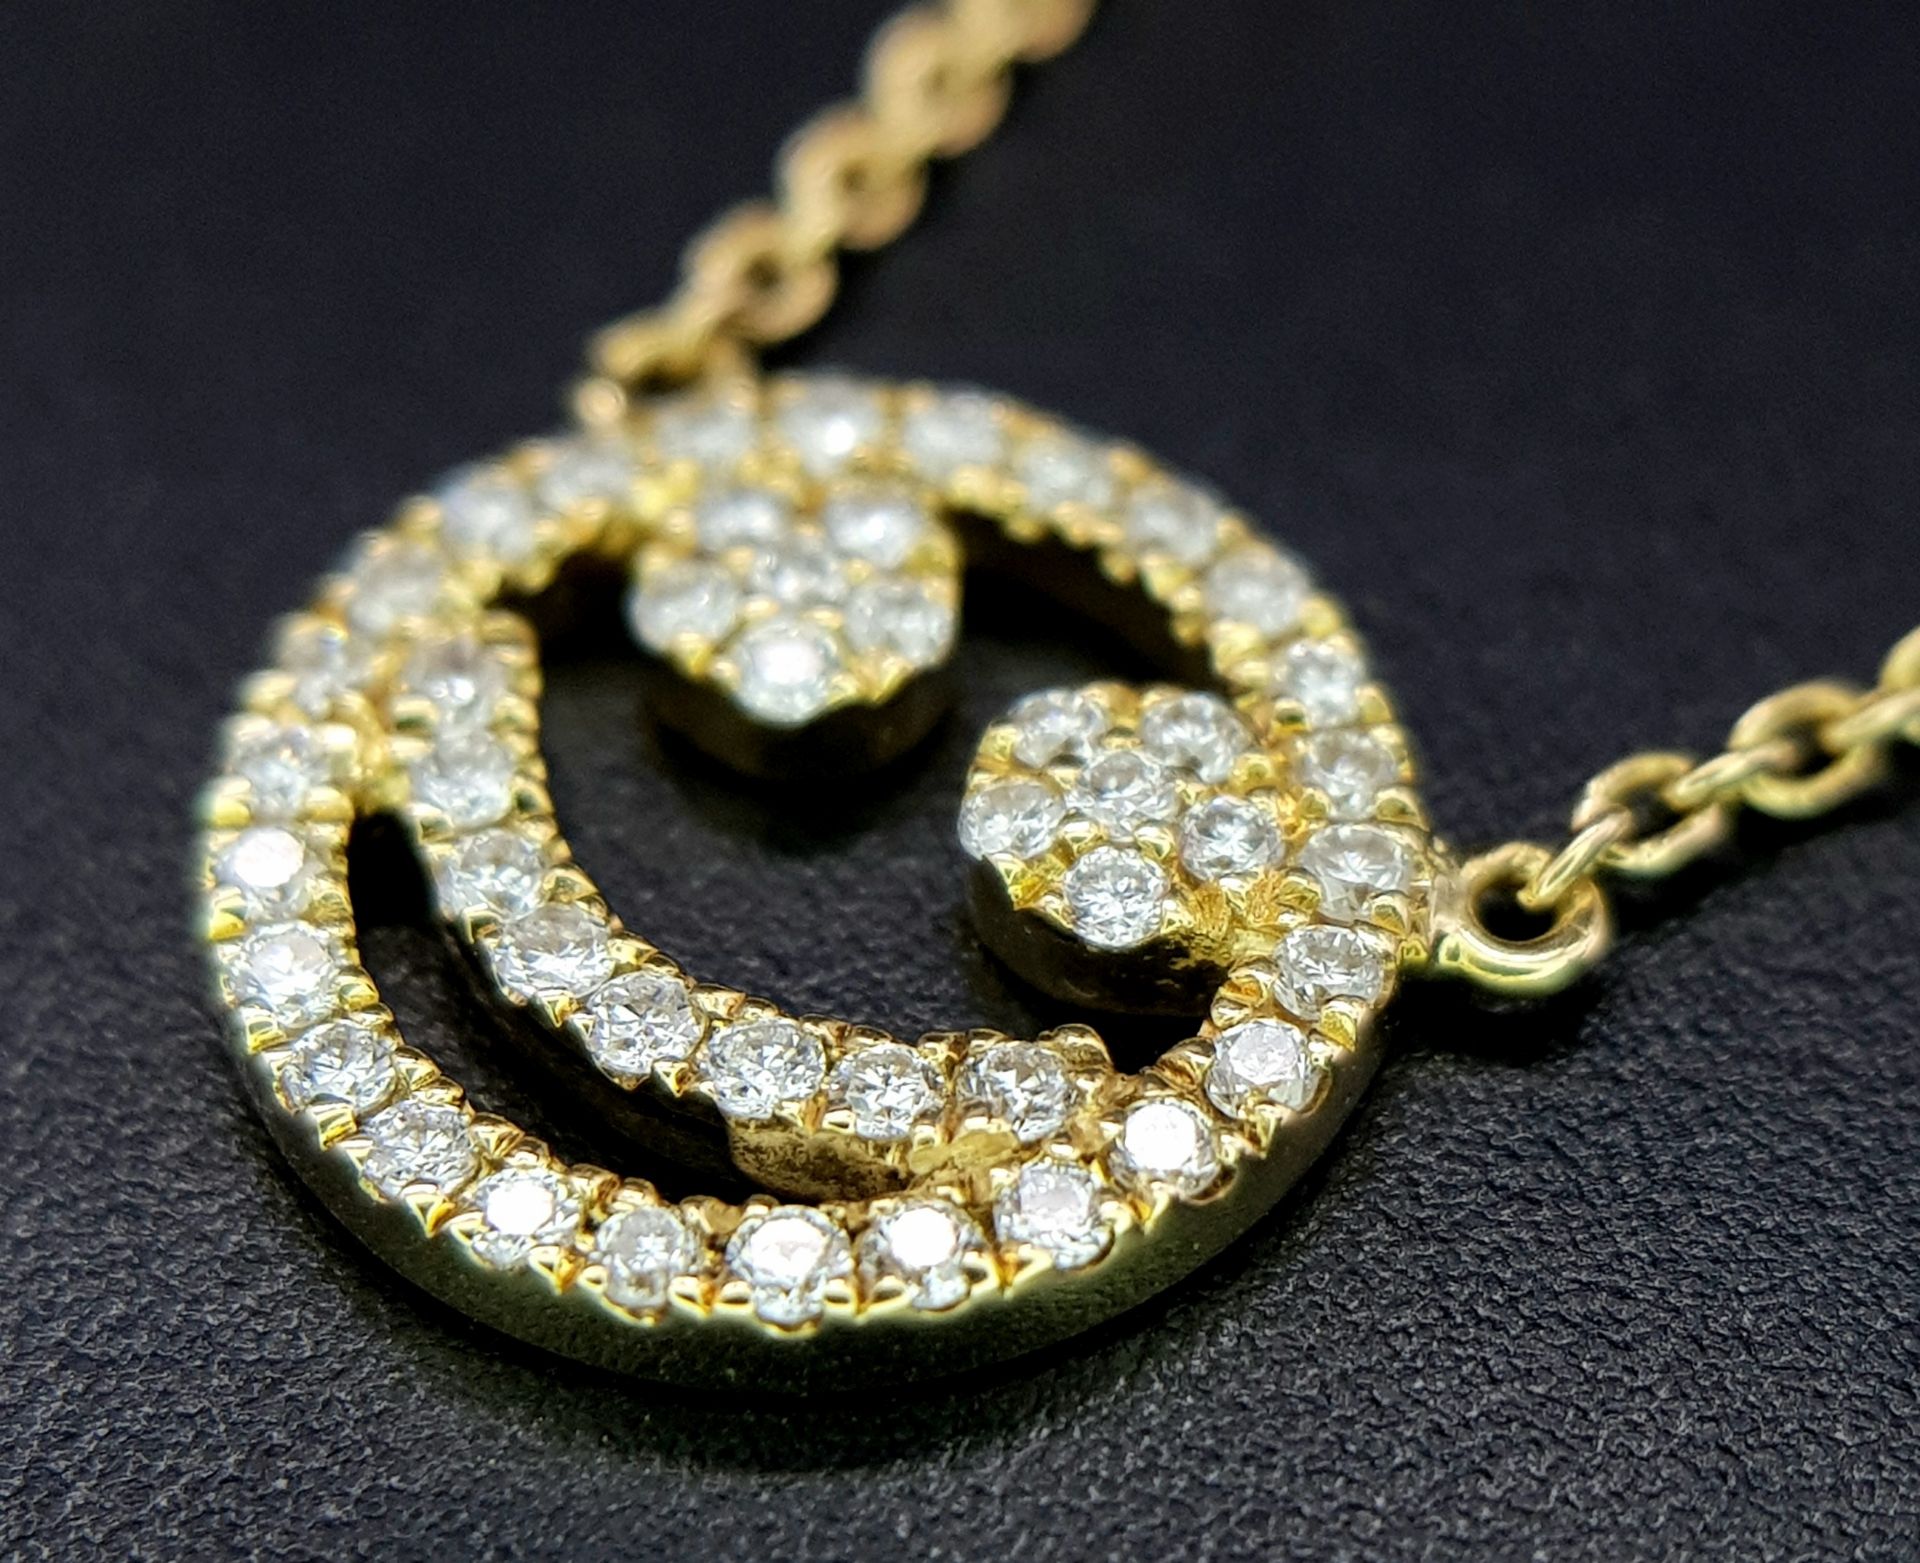 An 18K Gold Diamond Smiley Face Pendant on an 18K Yellow Gold Disappearing Necklace. 1cm diameter - Image 7 of 7